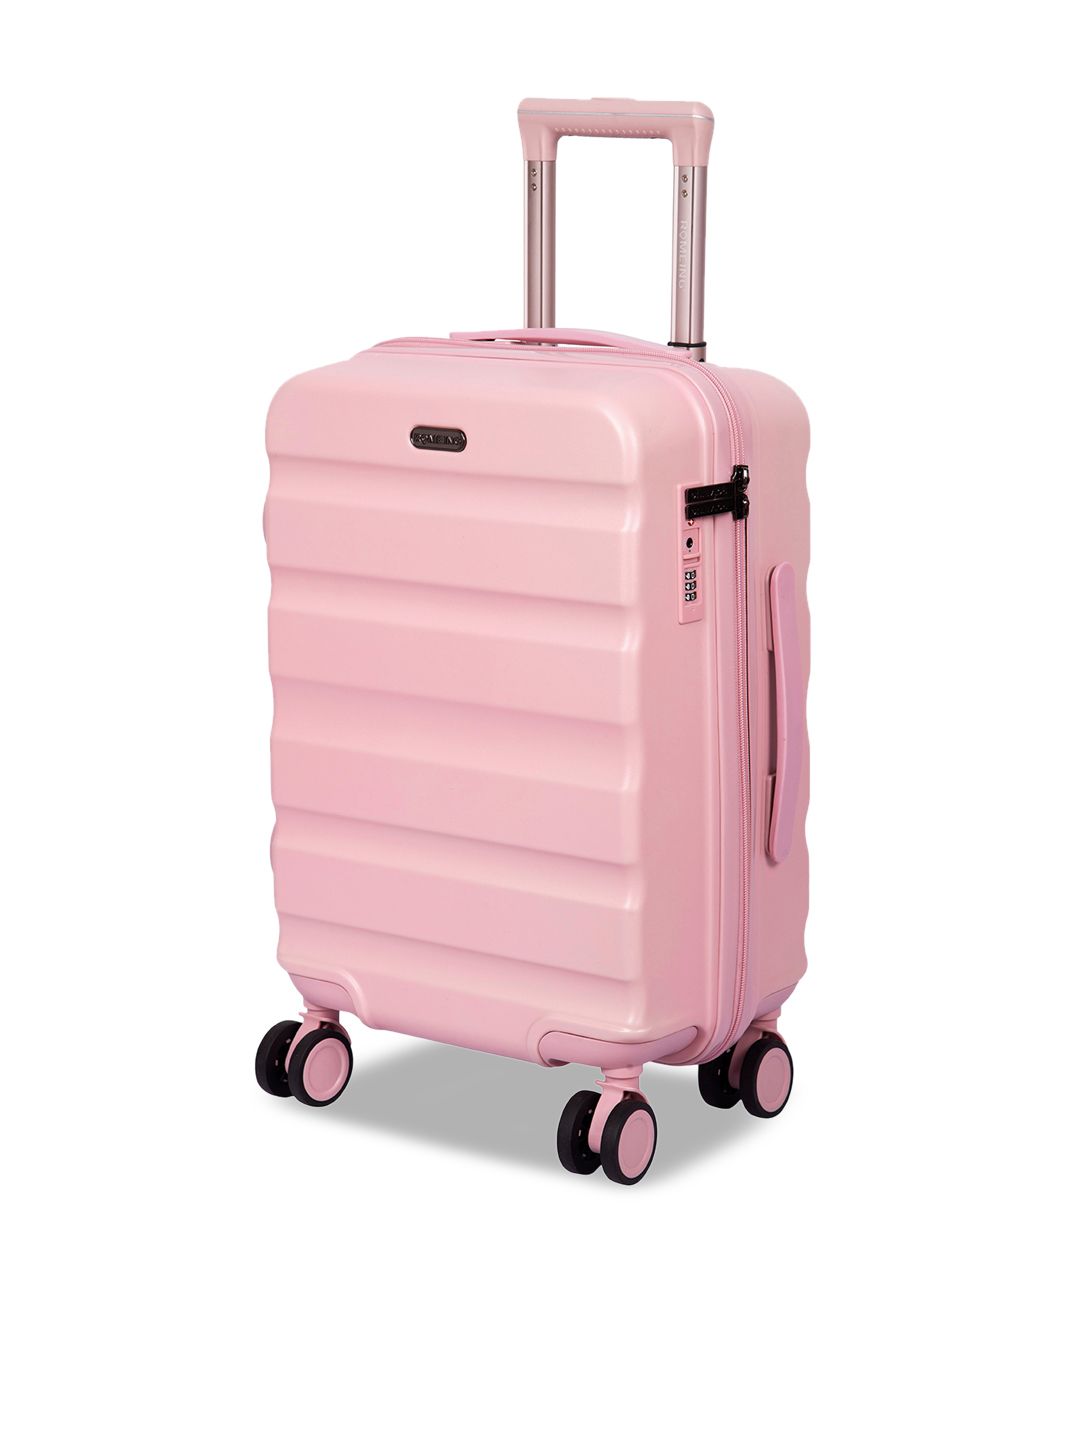 ROMEING Venice Pink Textured Hard-Sided Polycarbonate Cabin Trolley Suitcase Price in India